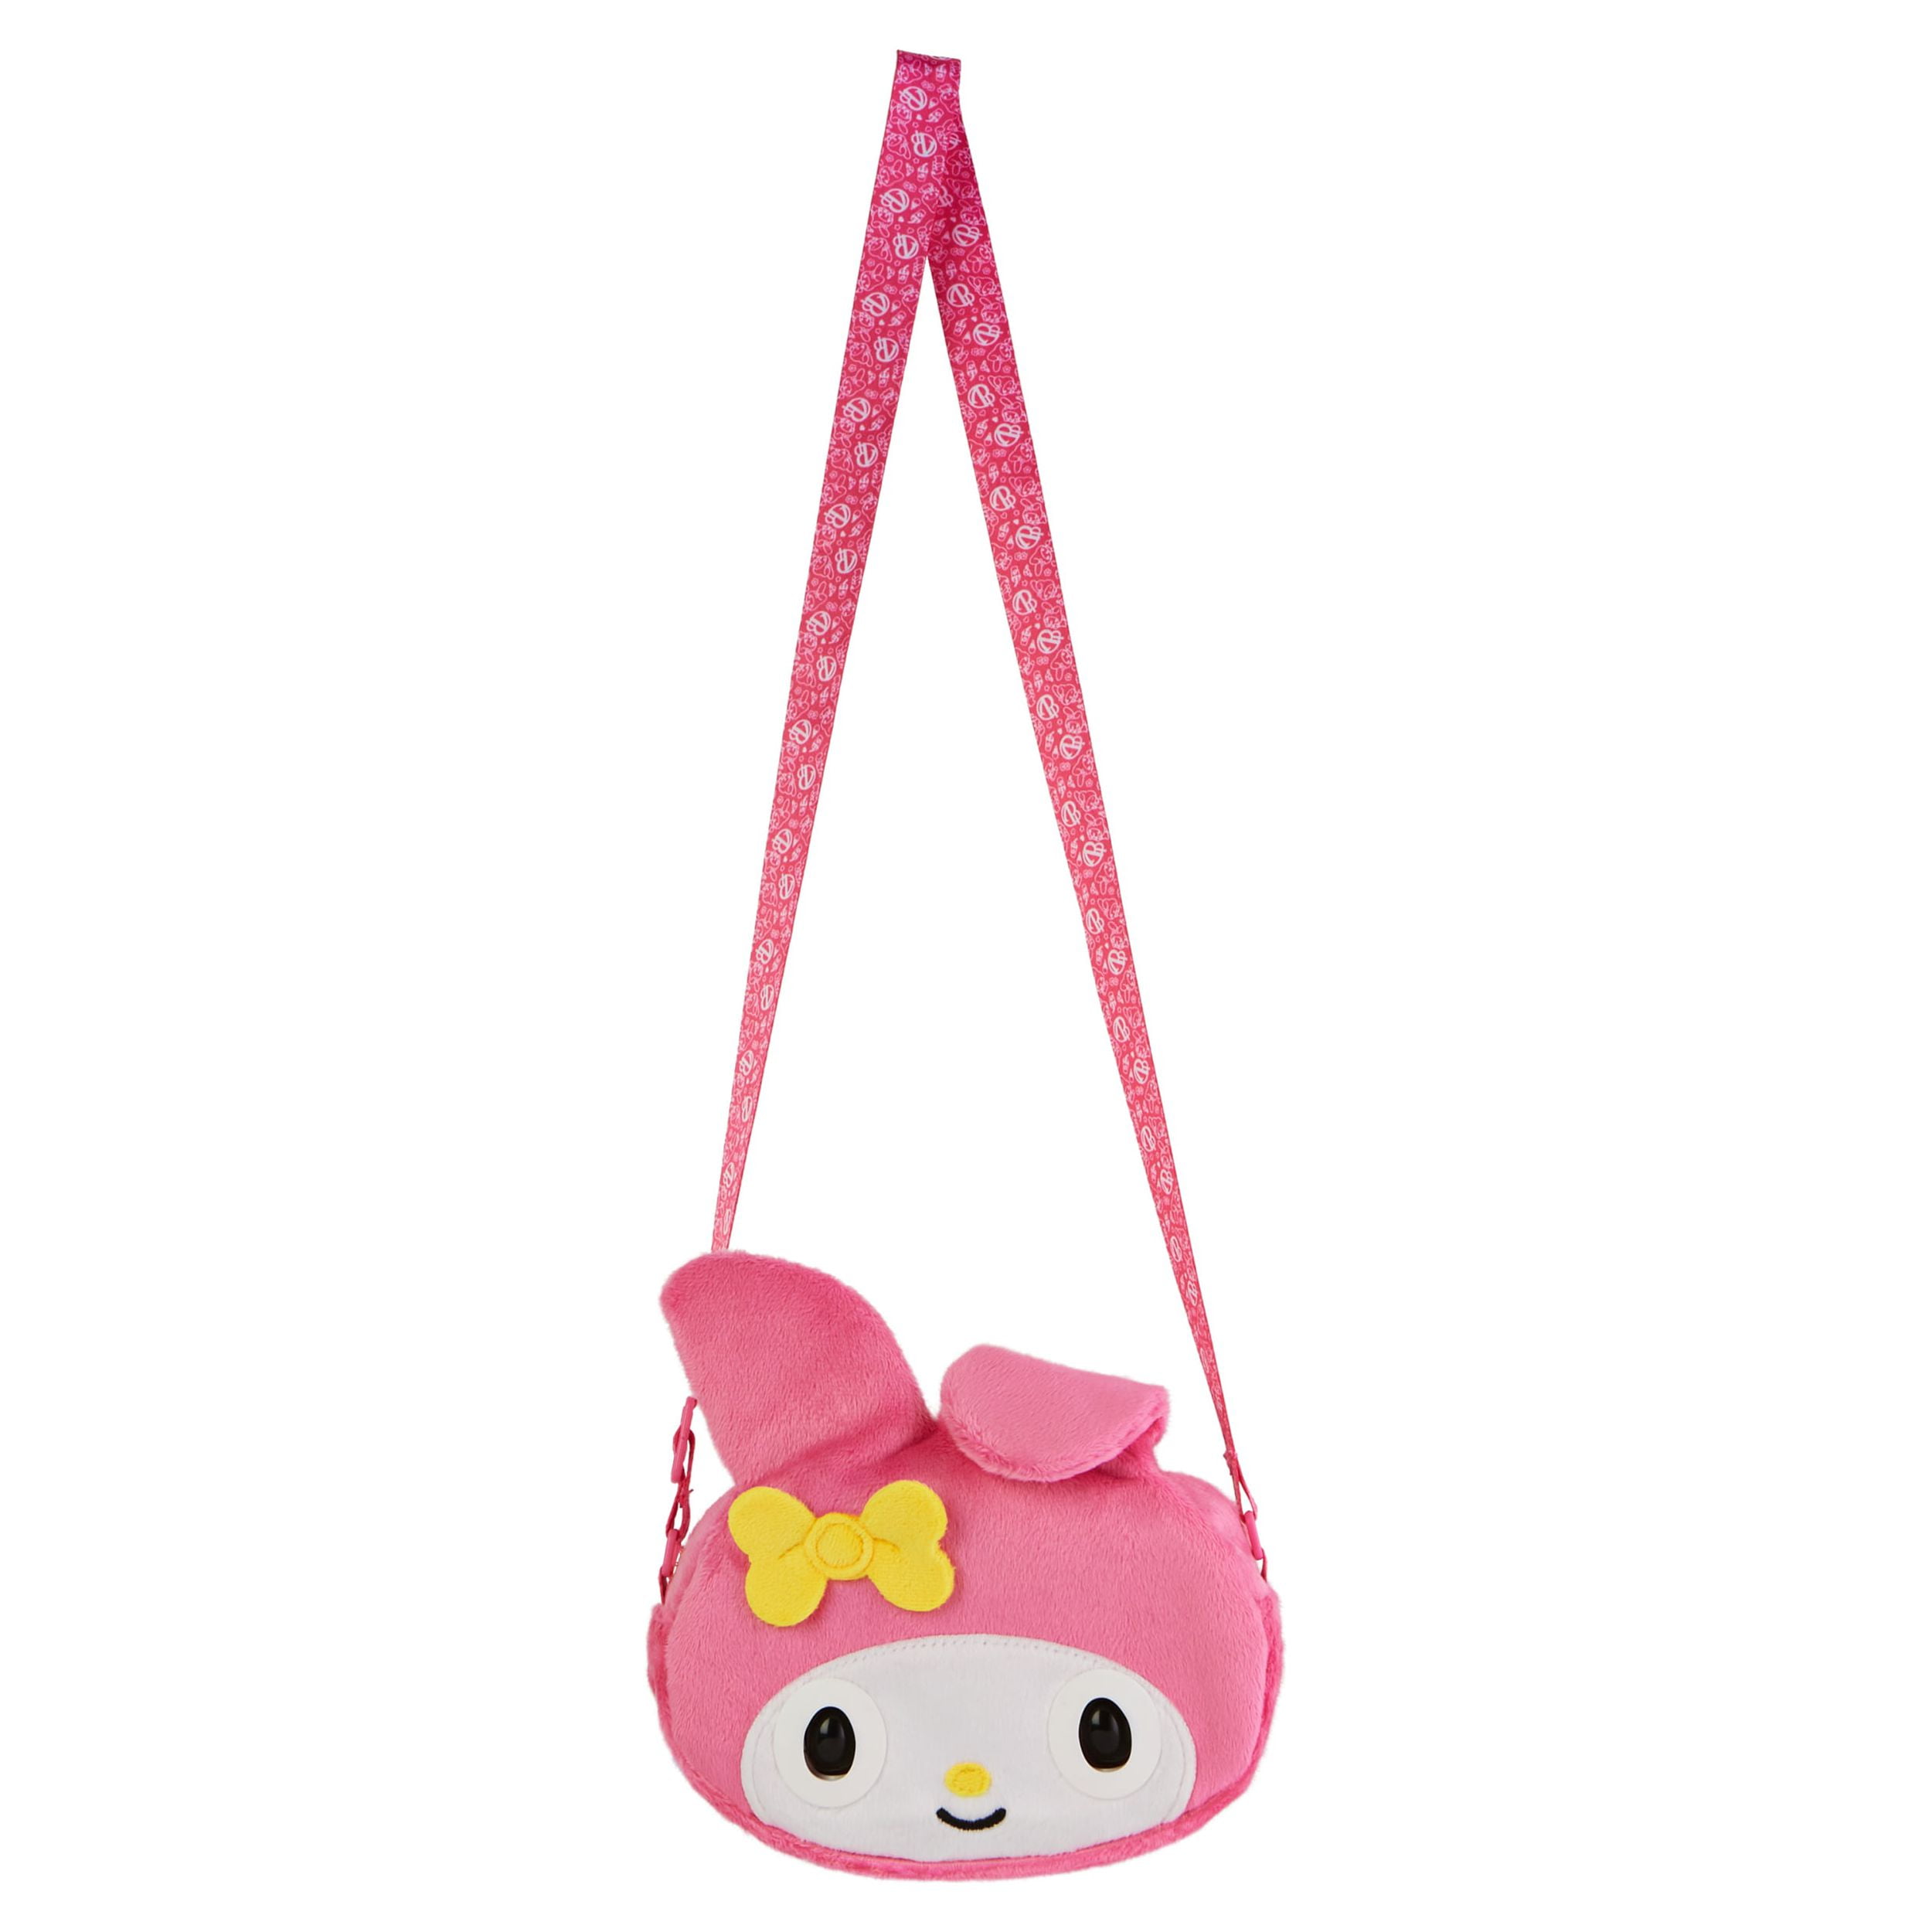  Purse Pets Hello Kitty - Interactive Shoulder Bag with 30+  Sounds, Reactions, Blinks and Music, Children's Bag and Toys in One, from 5  Years : Toys & Games